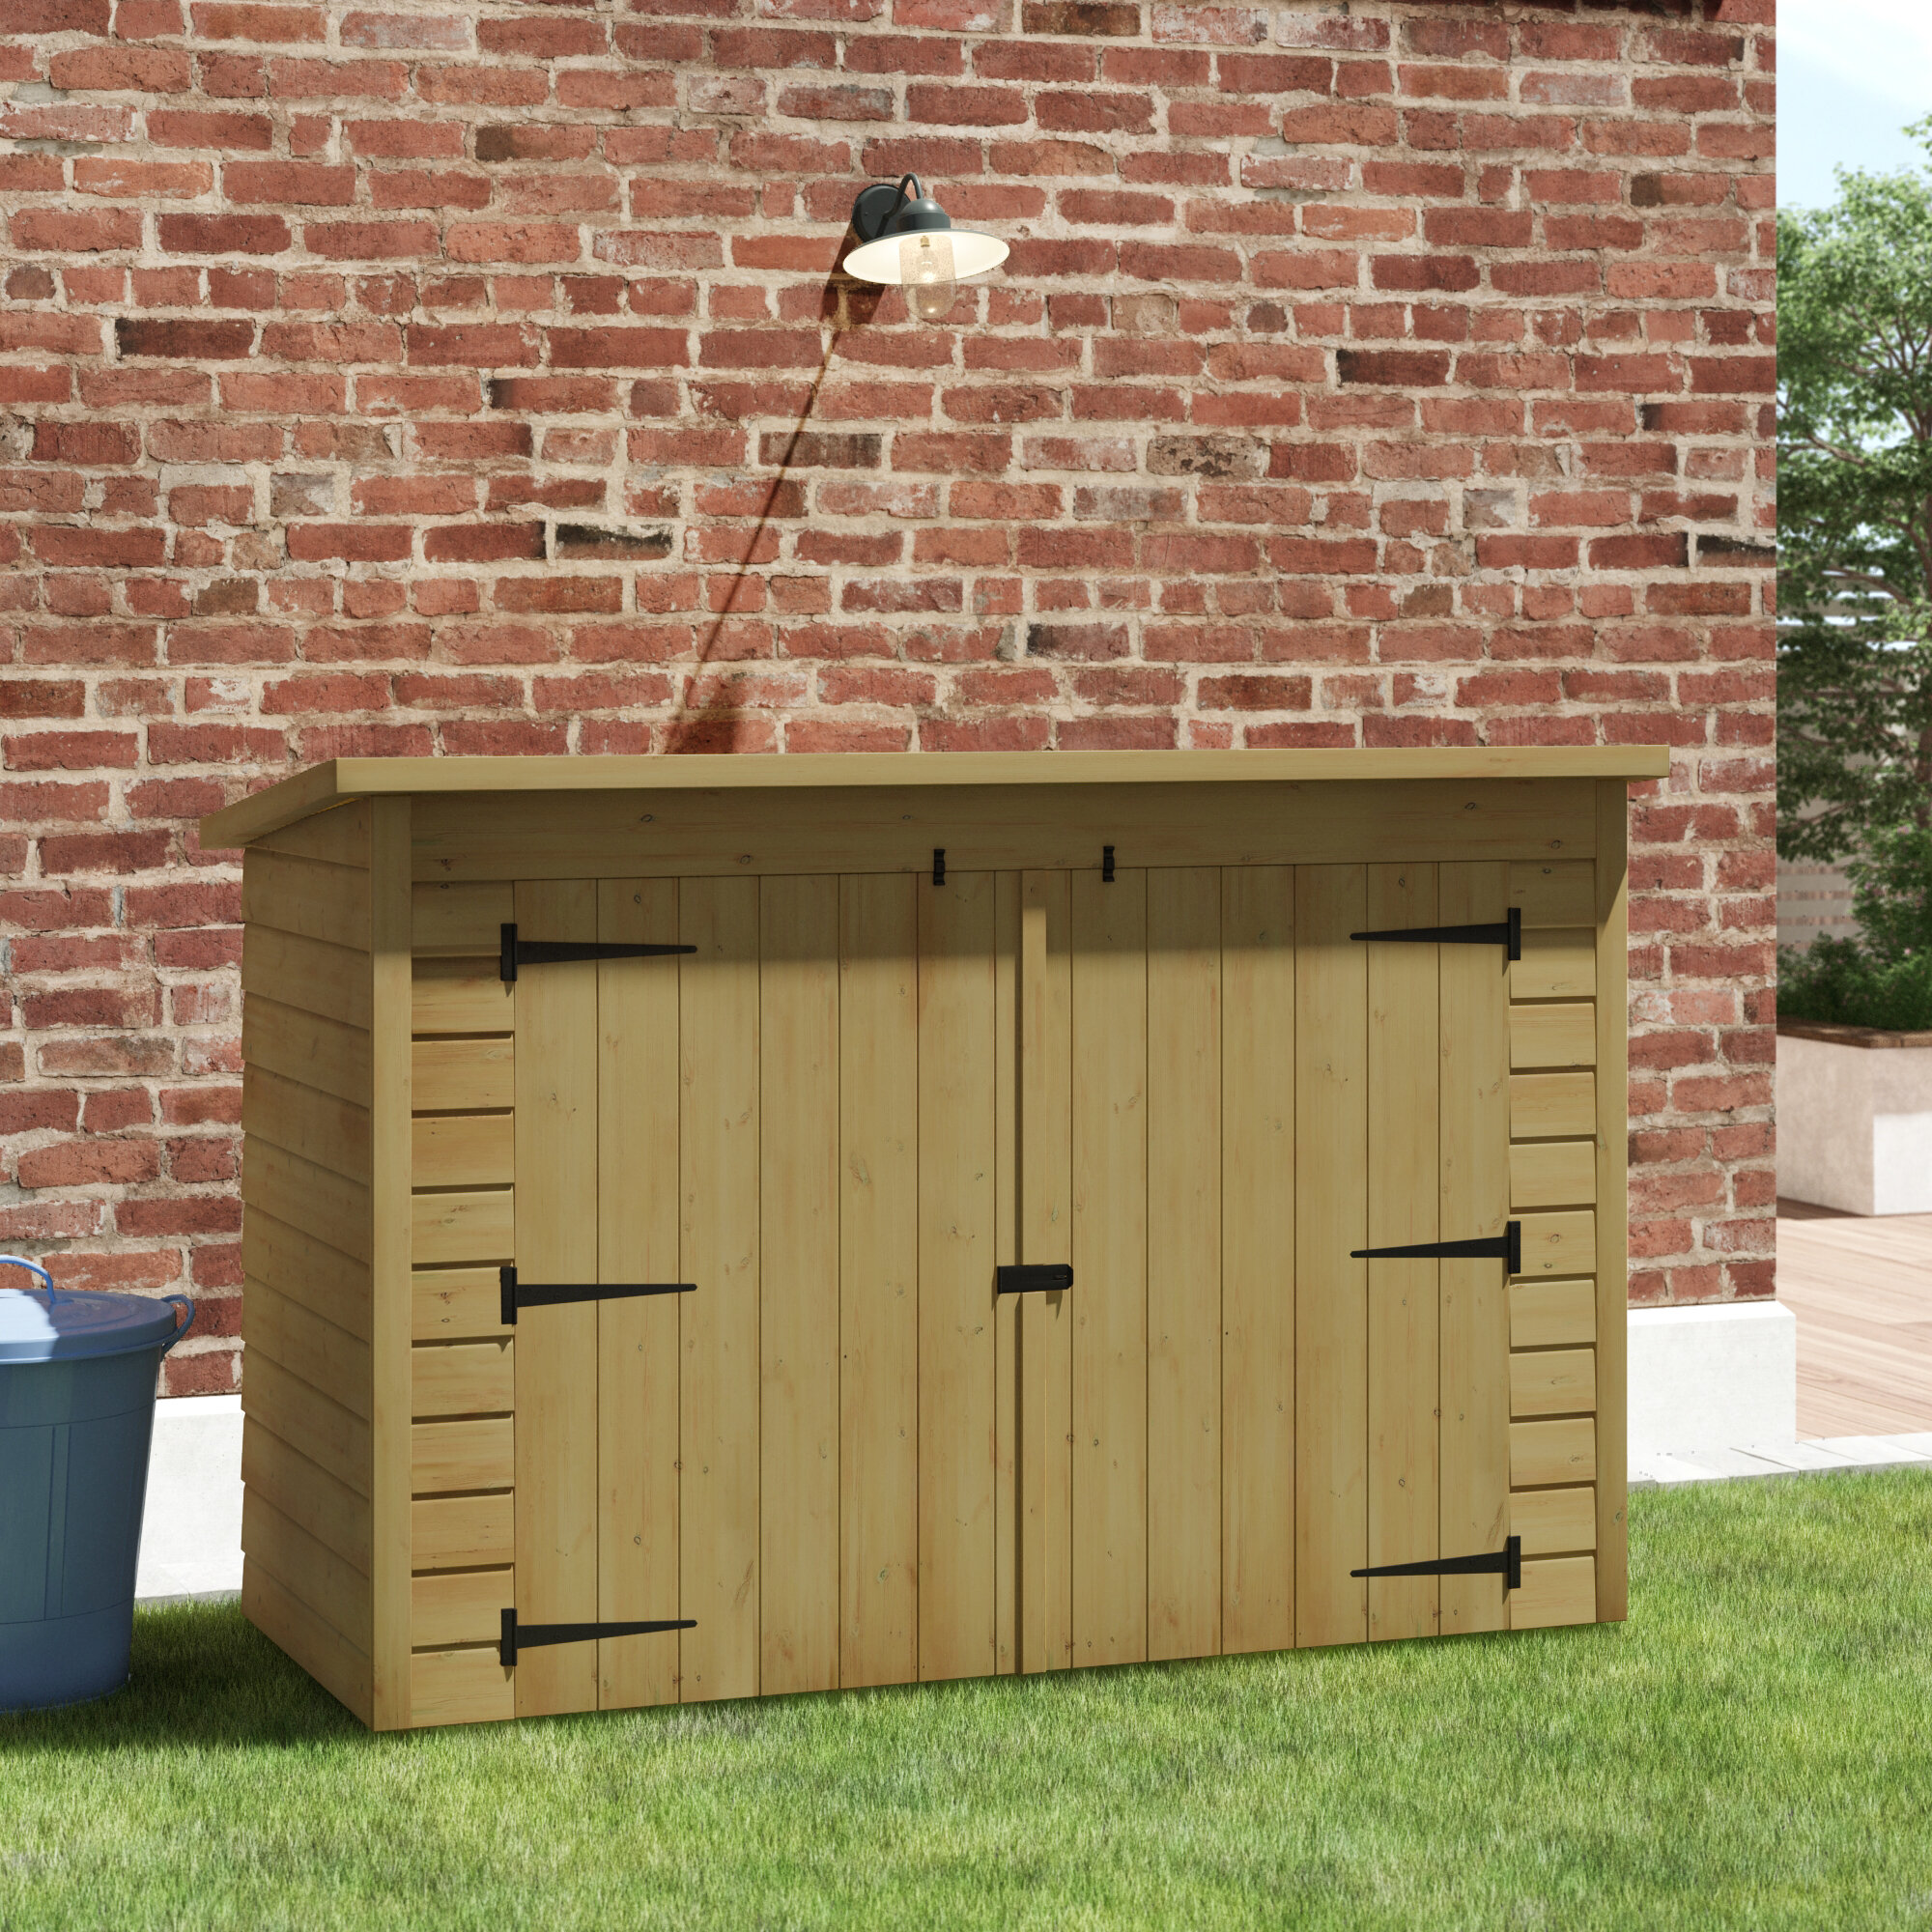 Wfx Utility 7 Ft W X 3 Ft D Tongue And Groove Pent Wooden Bike Shed Reviews Wayfair Co Uk